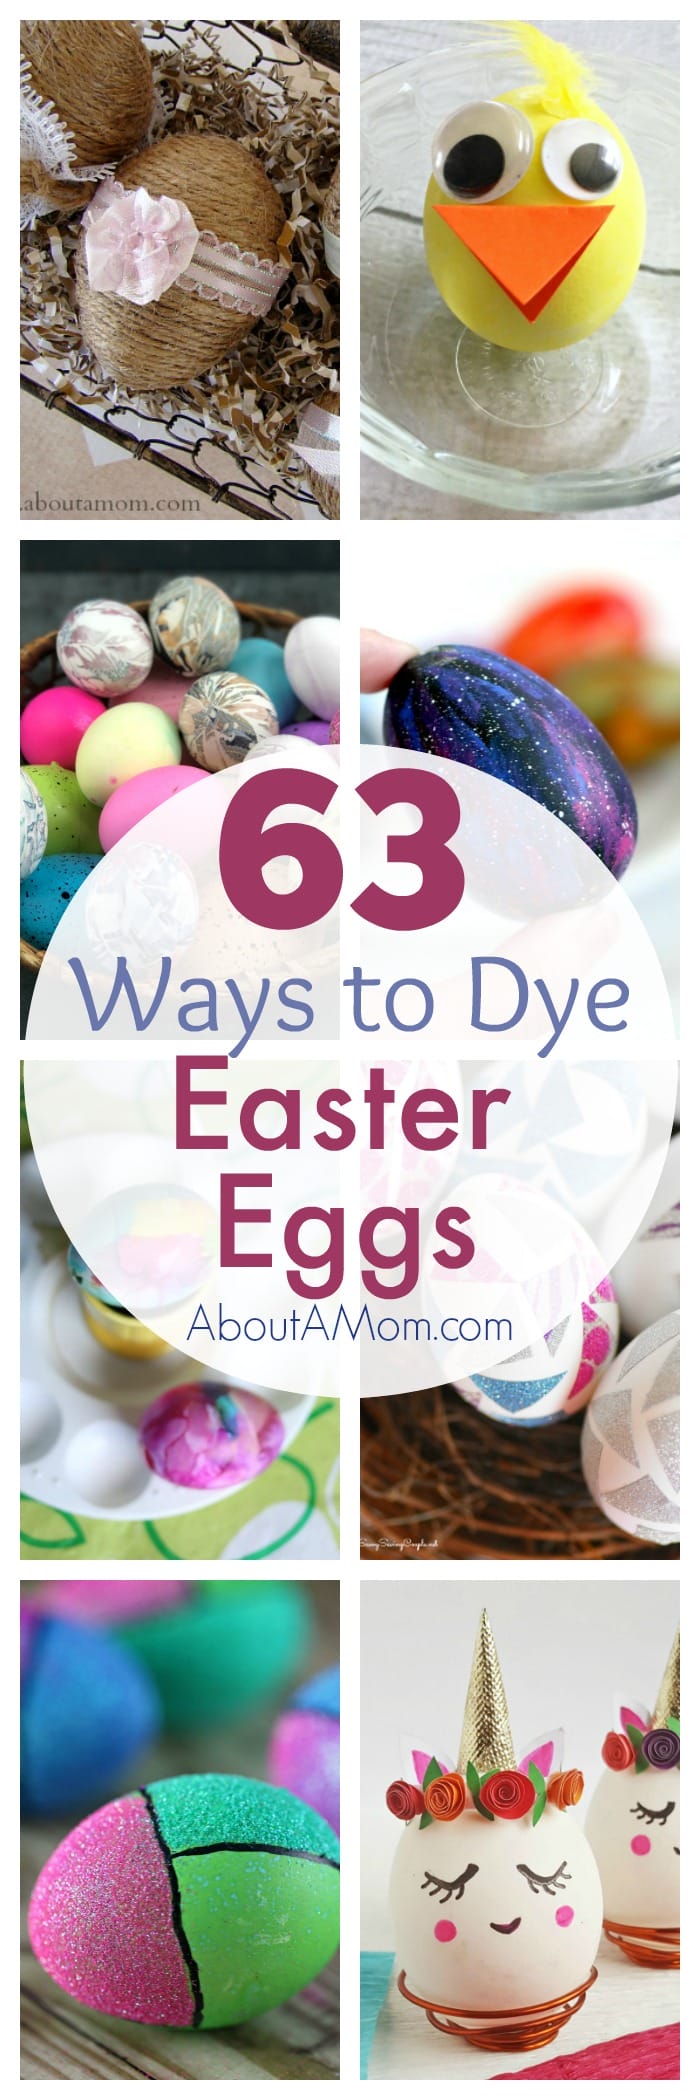 Looking for ways to dye Easter Eggs? We've rounded up 63 fun and creative ways to dye and decorate Easter eggs.